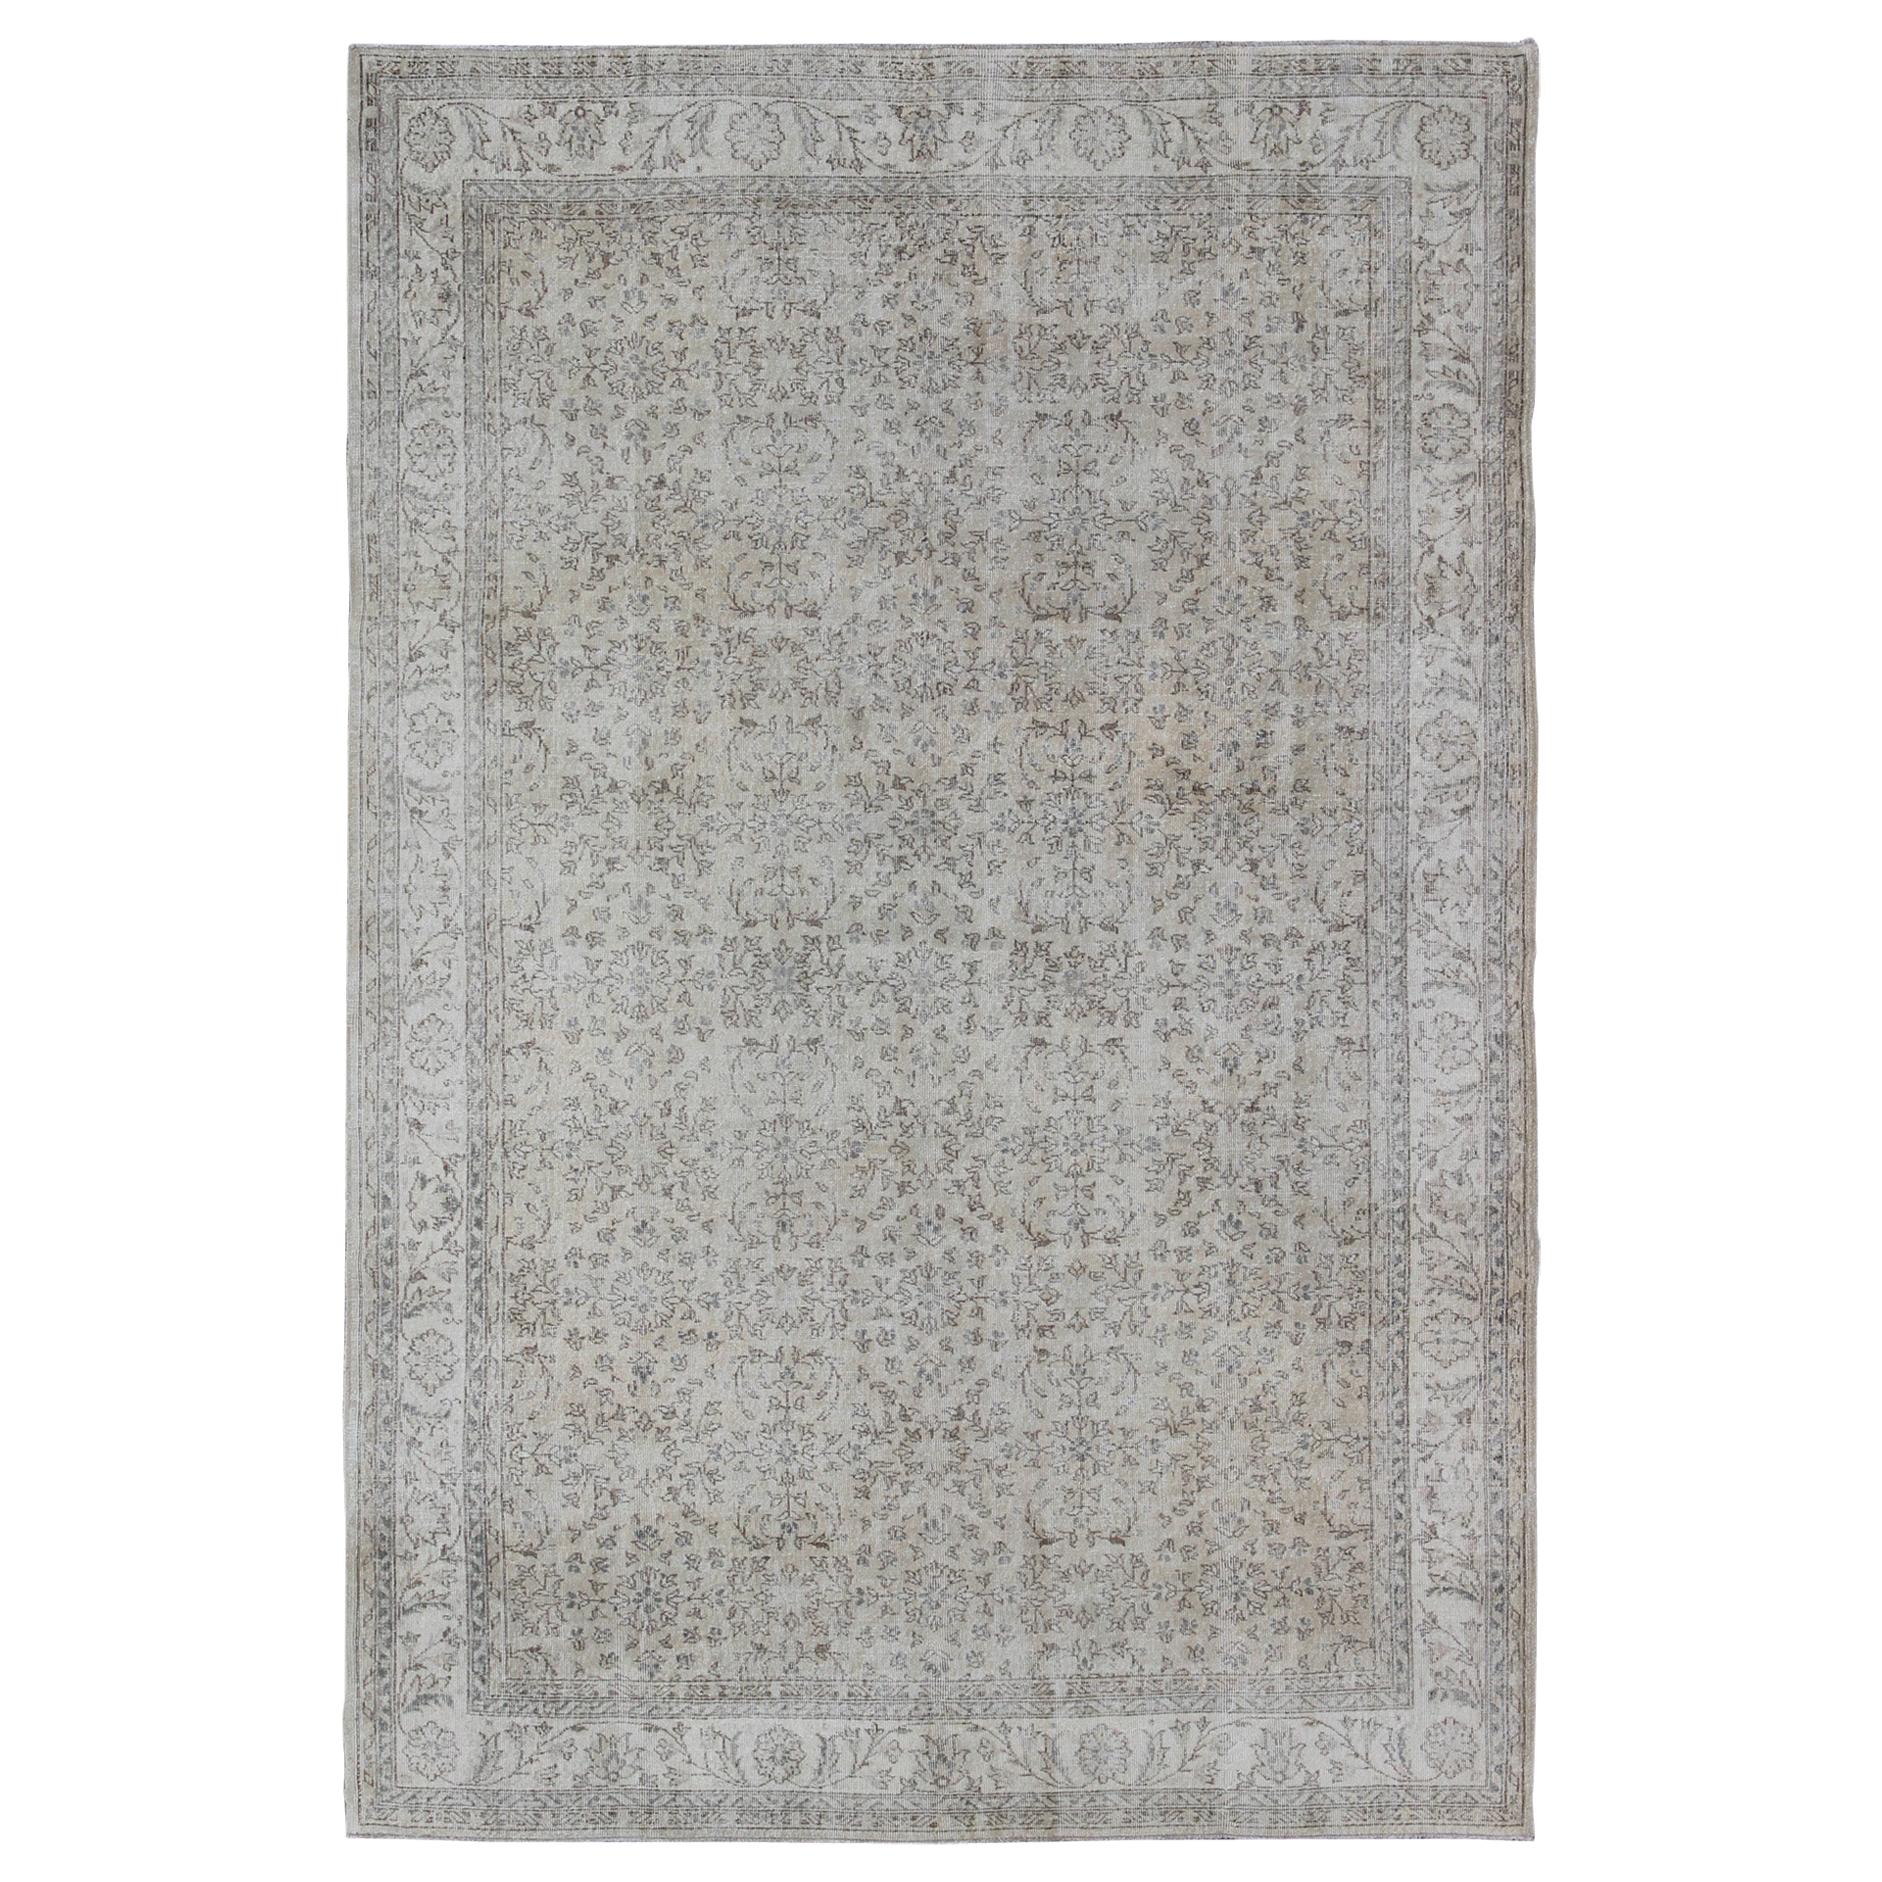 Neutral Colors Turkish Vintage Rug with Beautiful, Intricate Floral Design For Sale